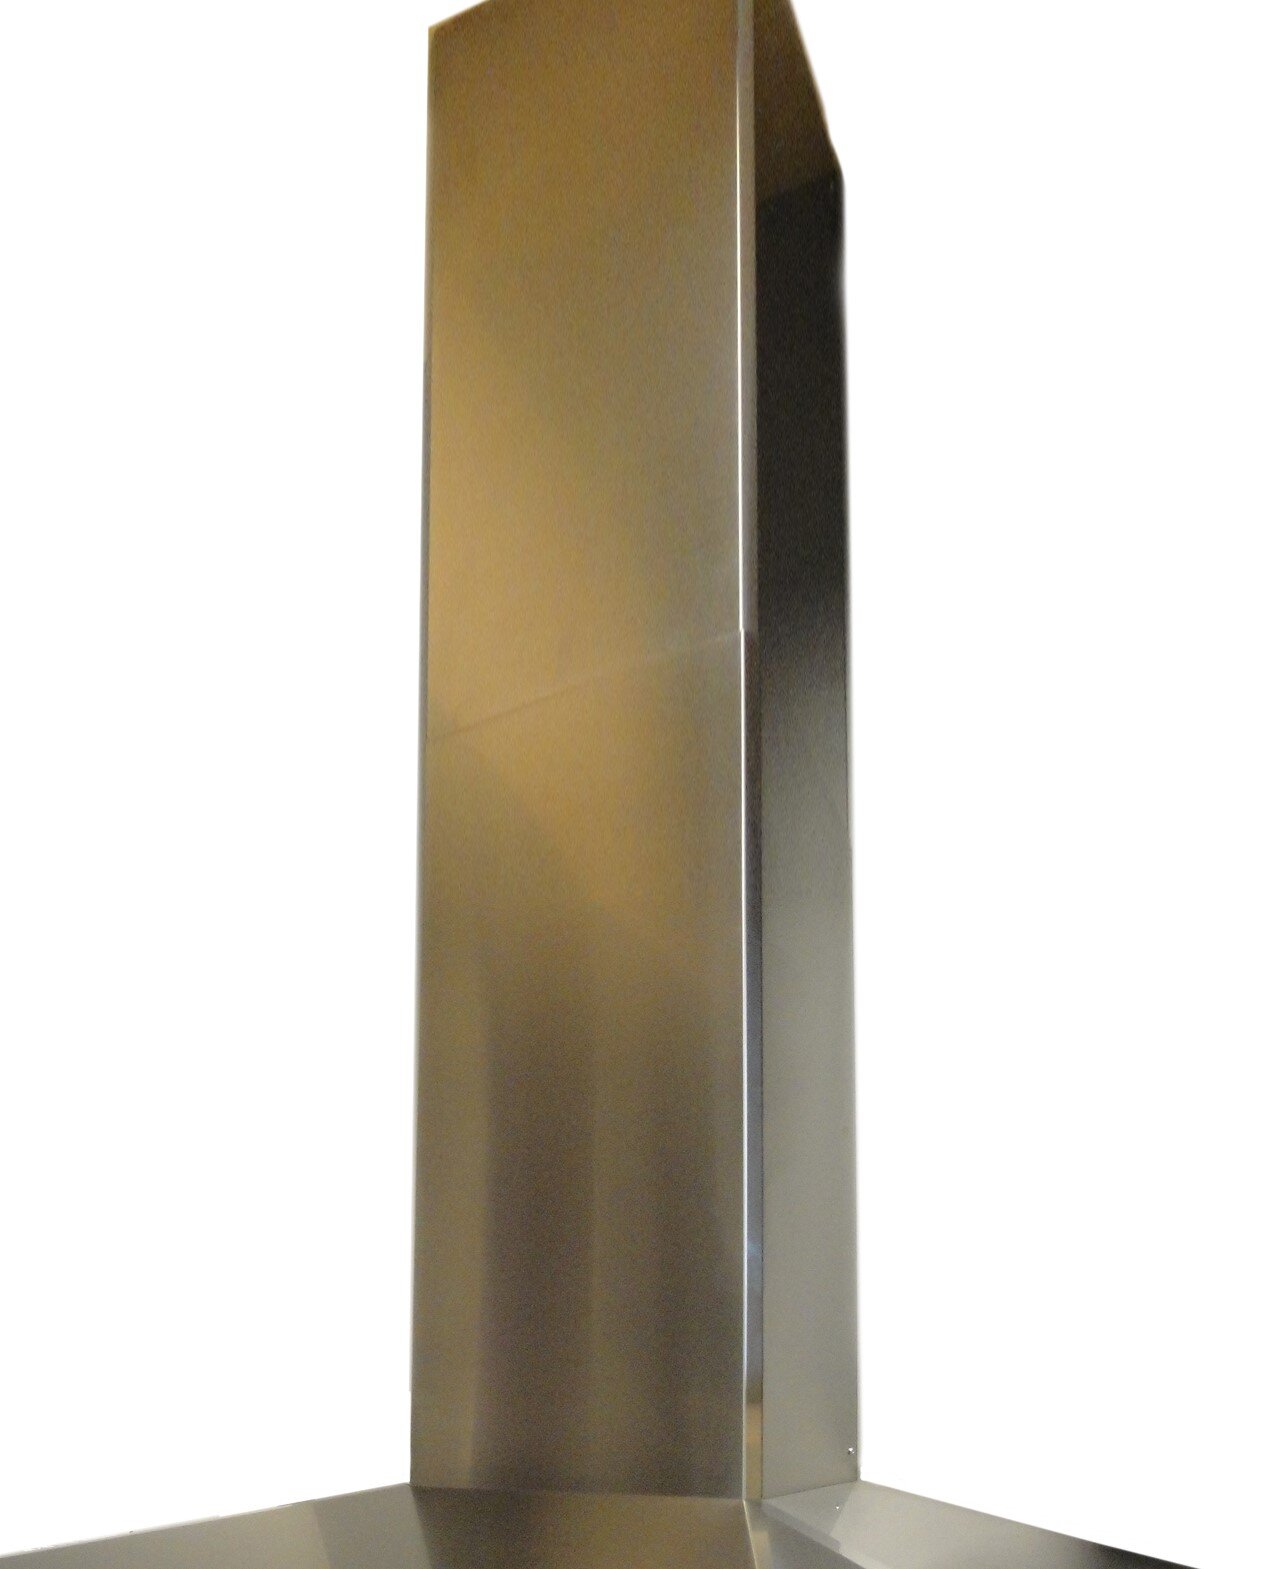 Stainless Steel Finish Air King ARASE 33-1/2 Inch Aragon Series Chimney Extension 